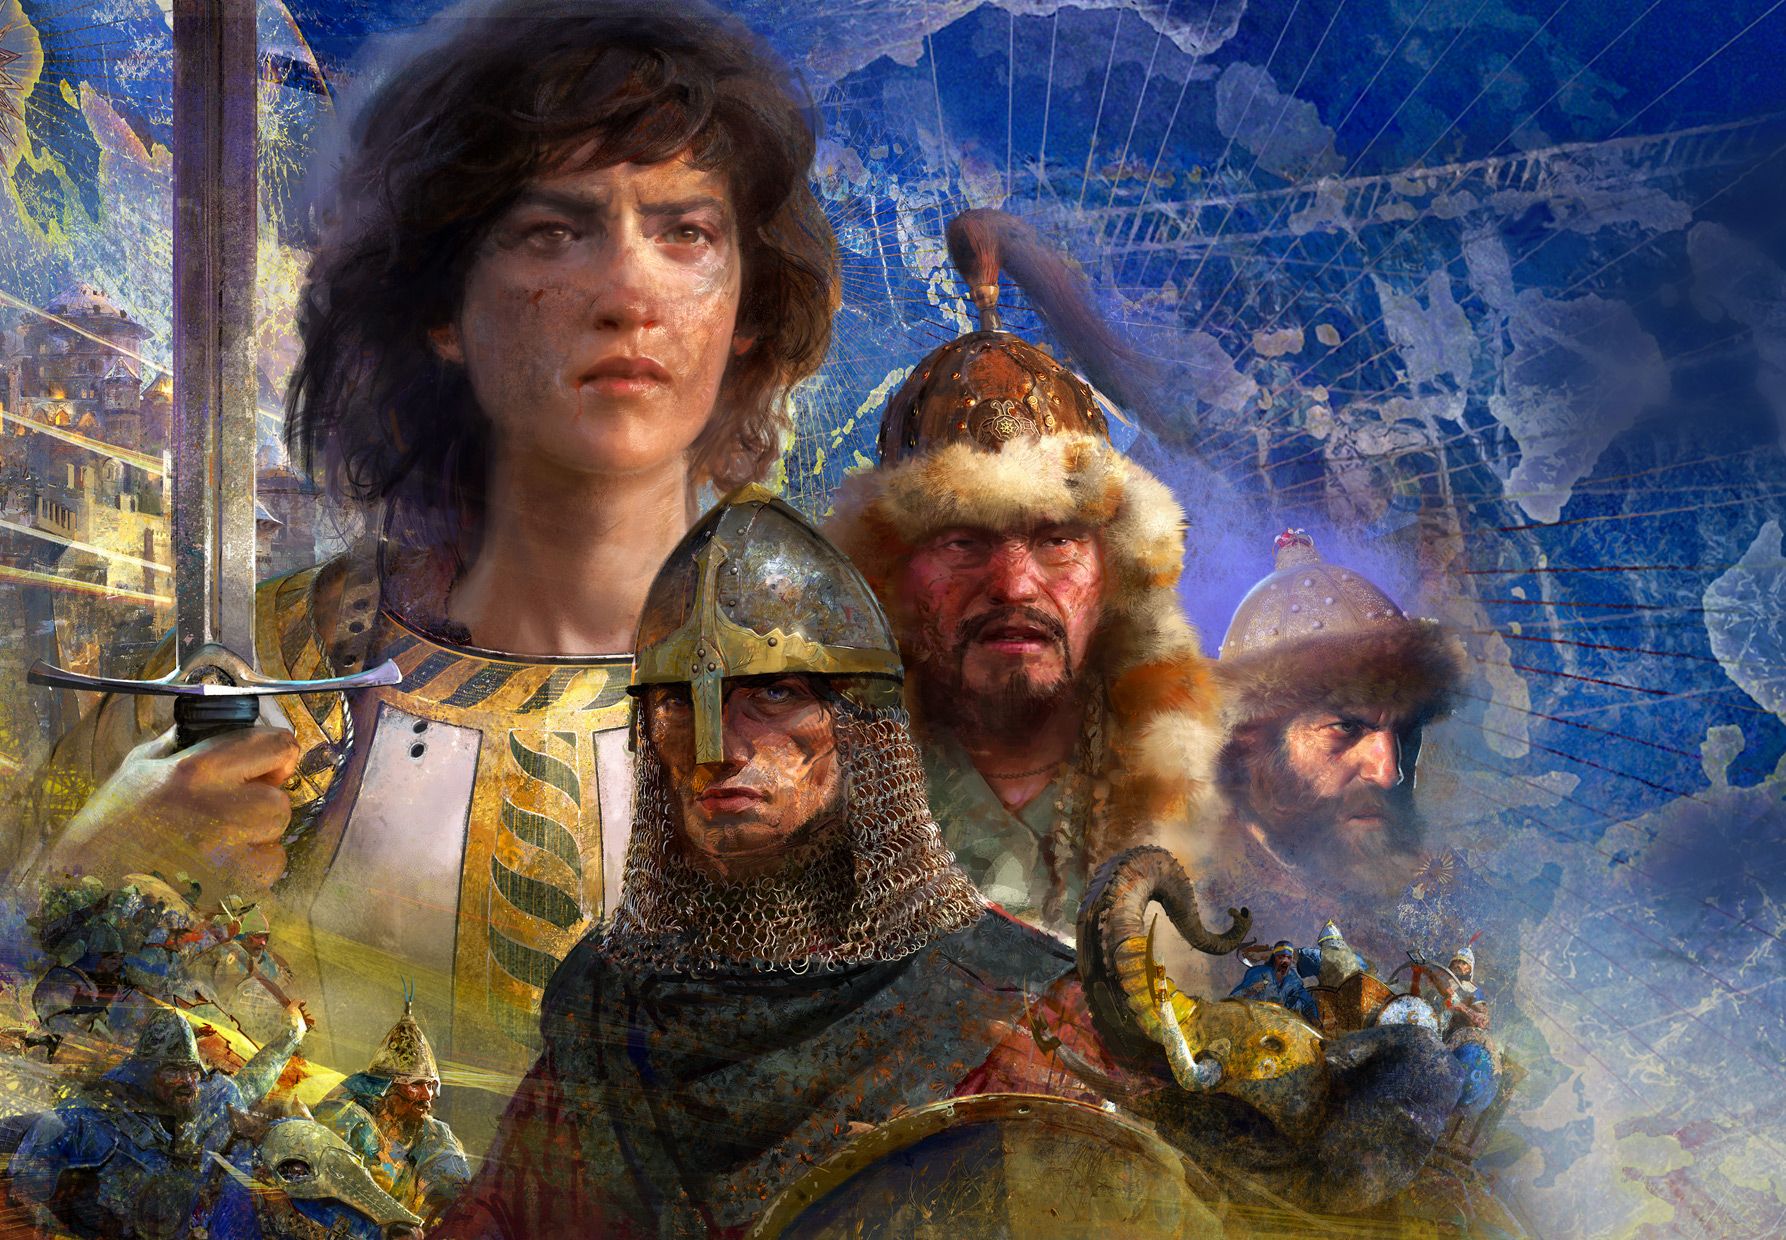 Image for Age of Empires 4 design director departs Relic after 24 years